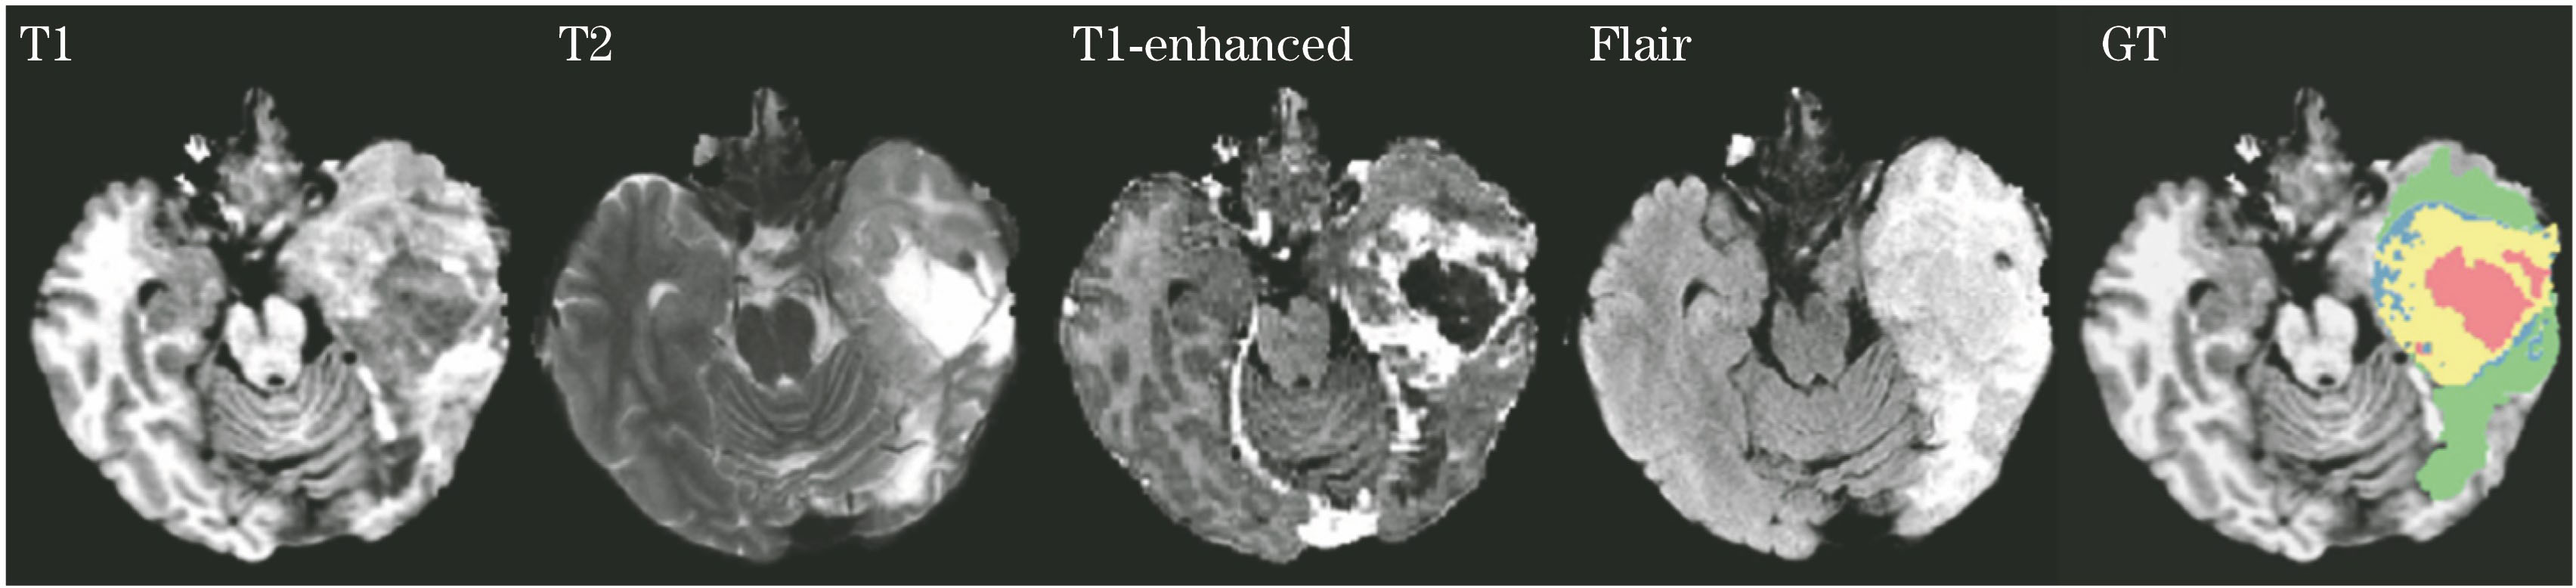 Four types of brain tumor MRI images and the expert segmentation result